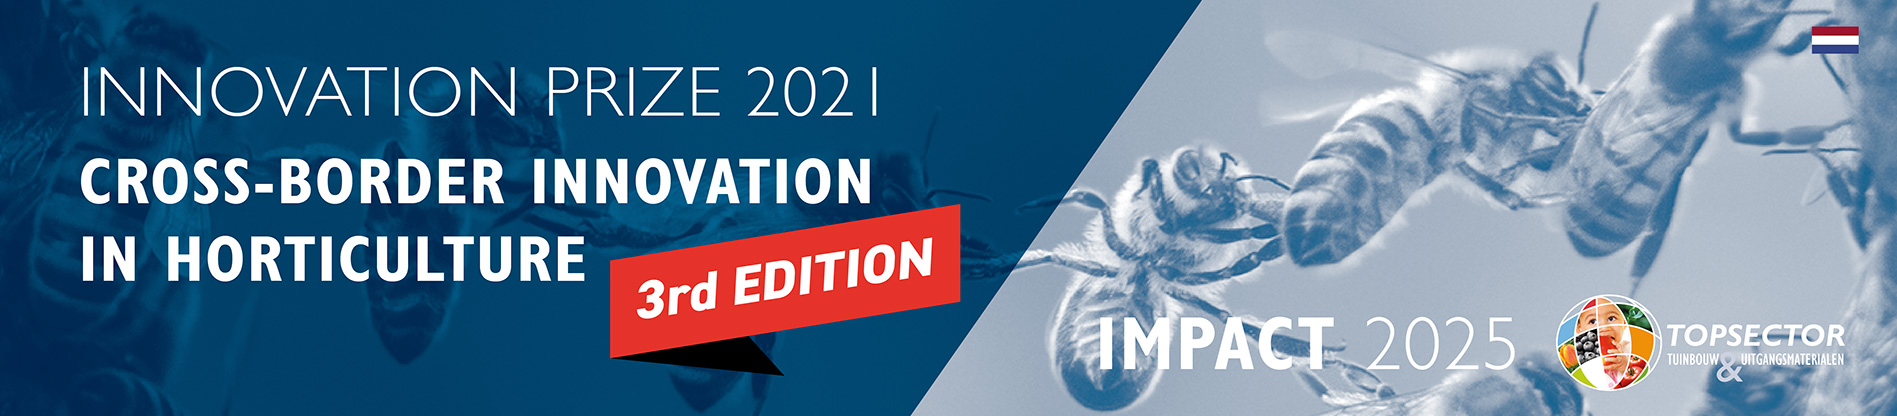 IMPACT2025-InnovationPrize-3rd-Edition